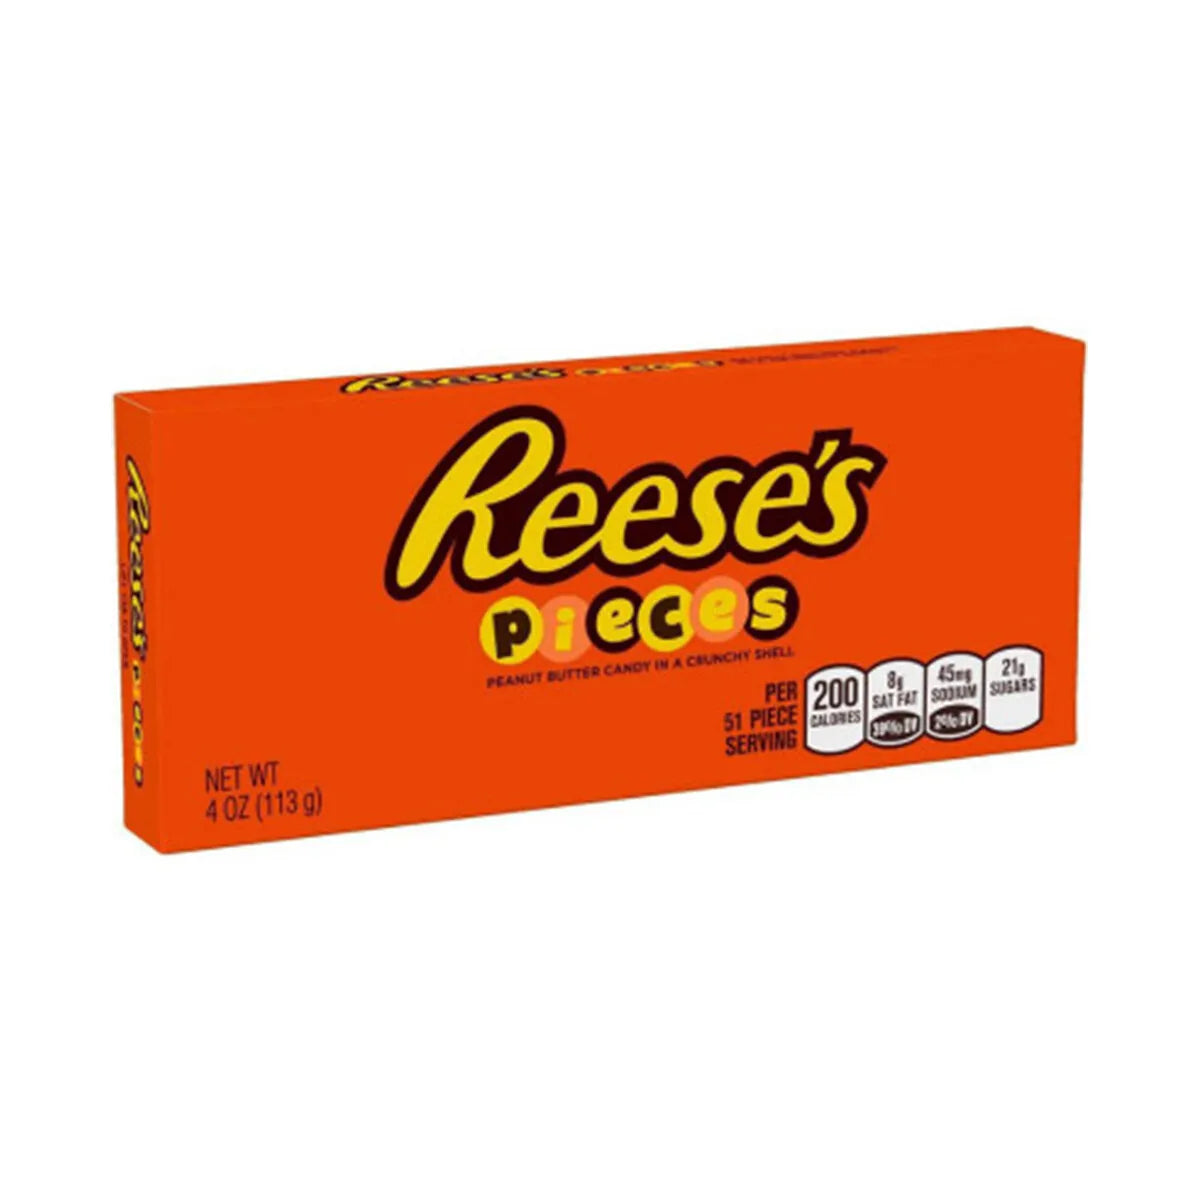 Reese's Pieces Peanut Butter, peanut butter coated candies